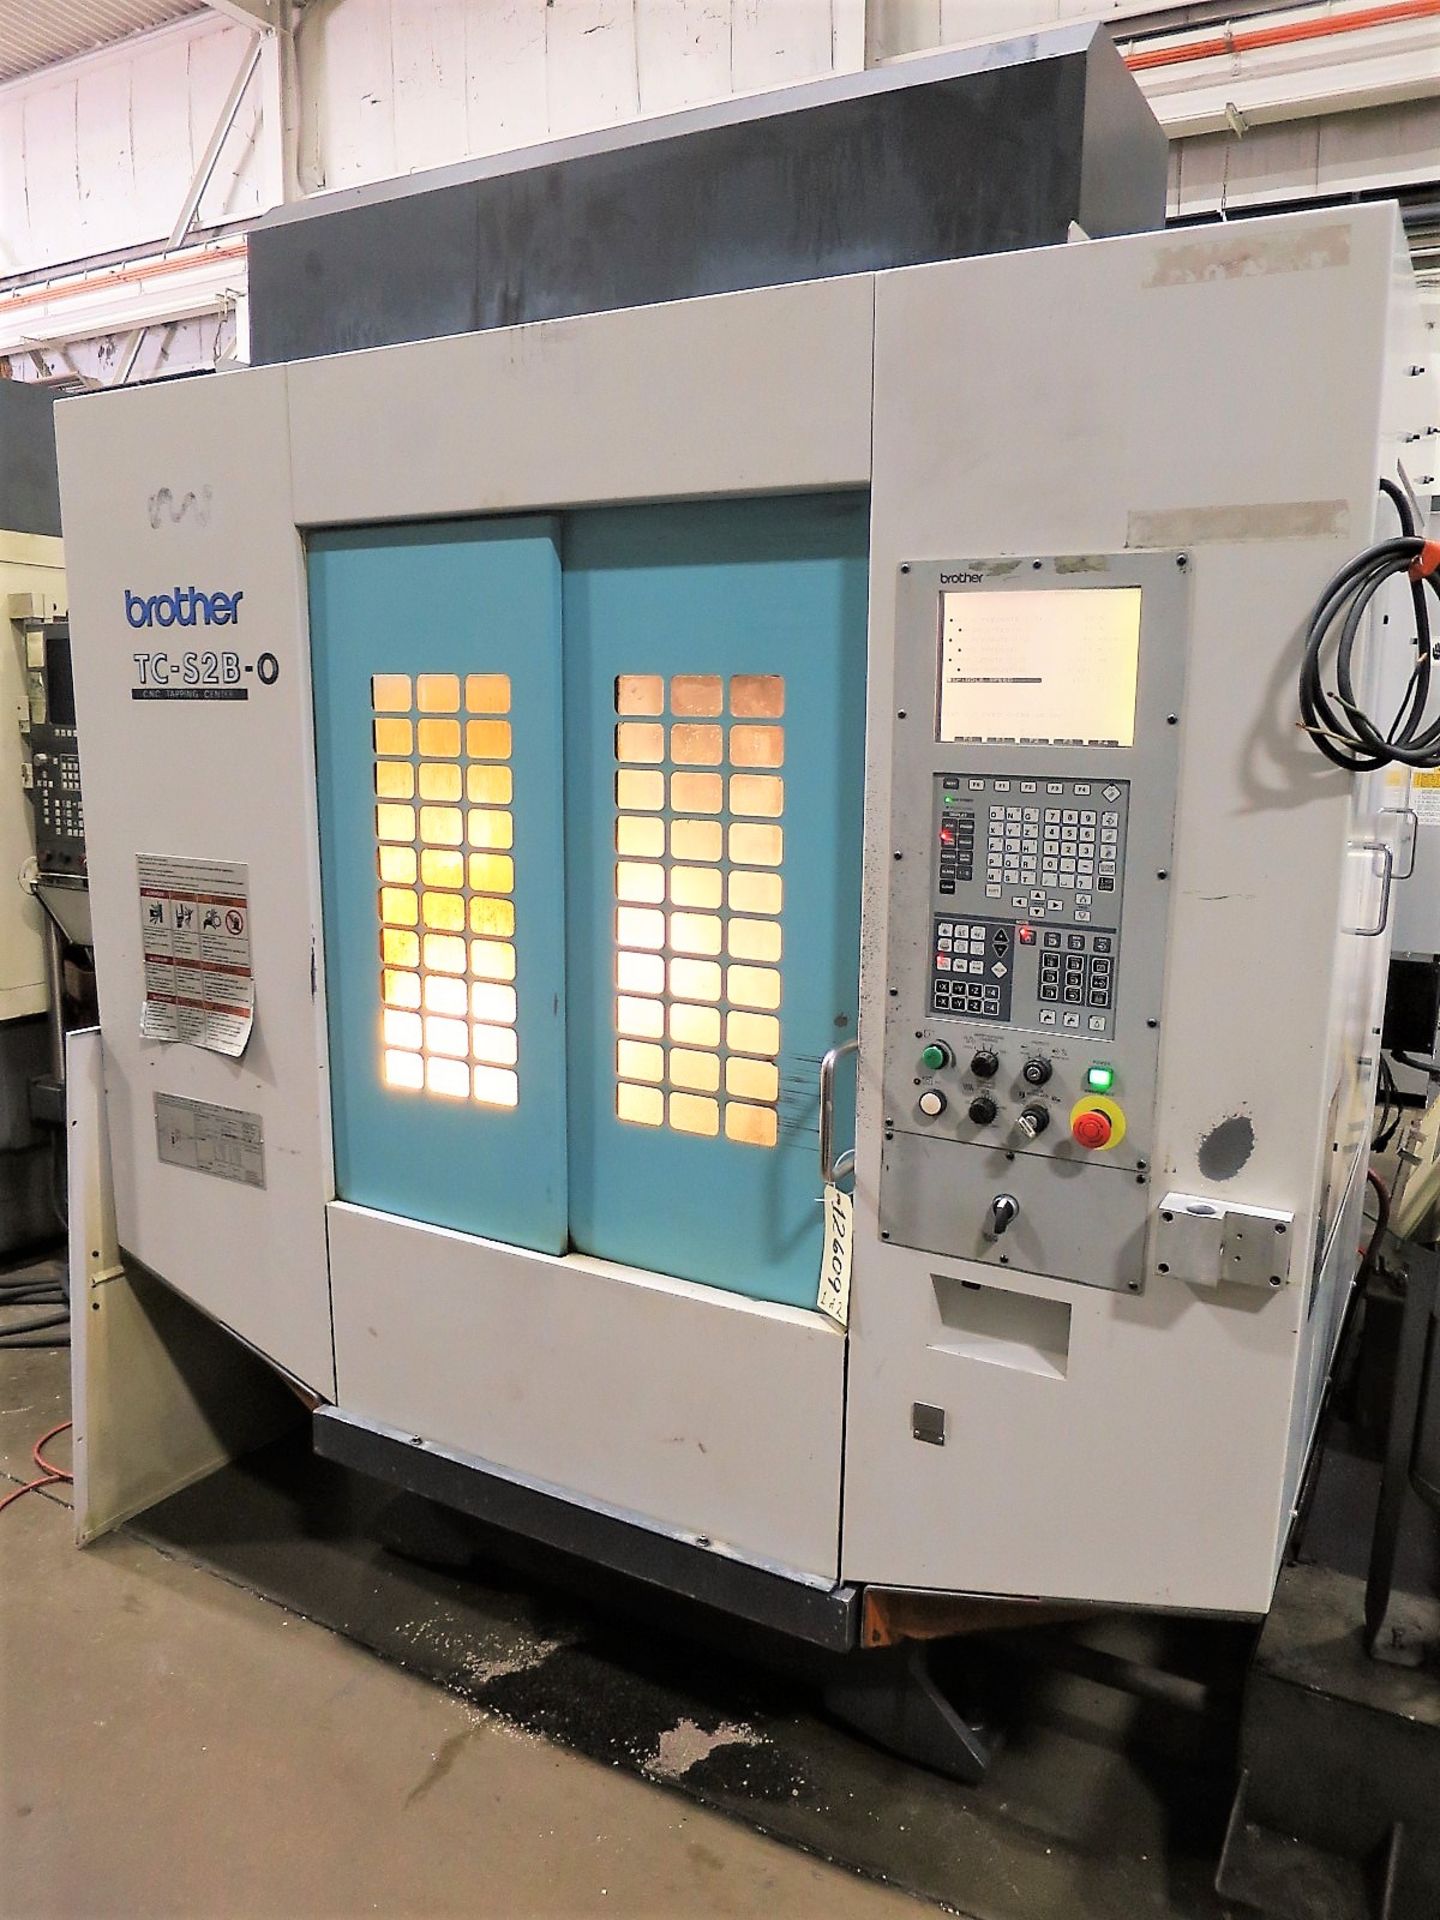 Brother TC-S2B-0 CNC 4-Axis Drill Tap Vertical Machining Center, S/N 111632, New 2004